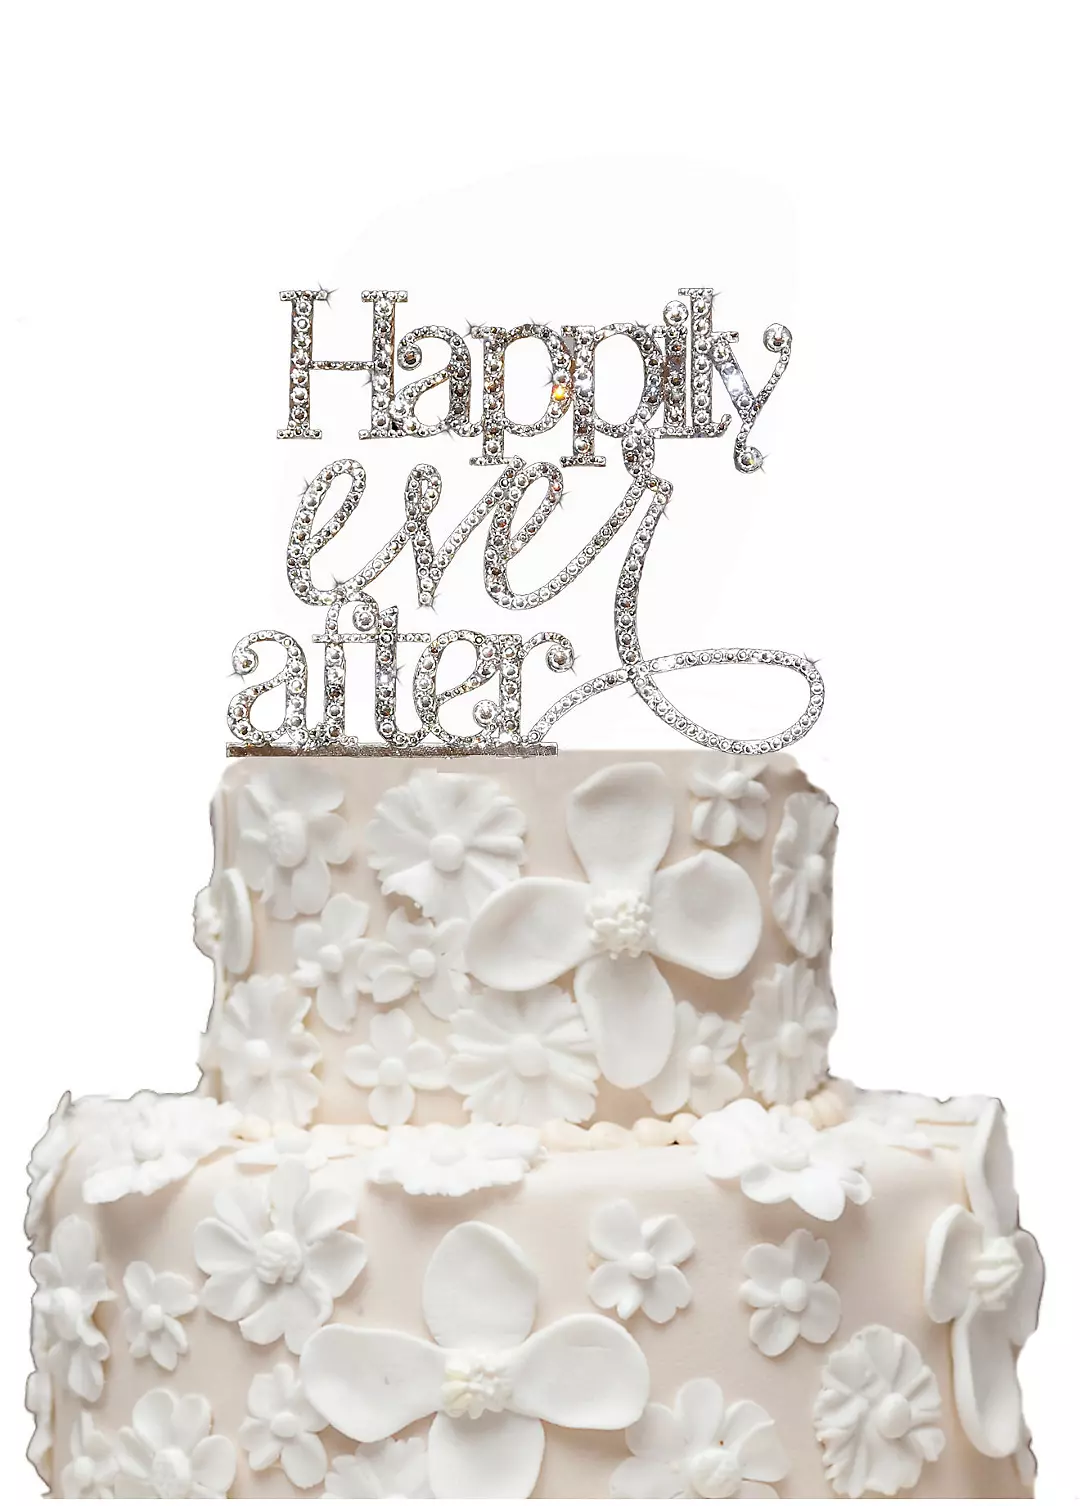 Rhinestone Happily Ever After Cake Topper Image